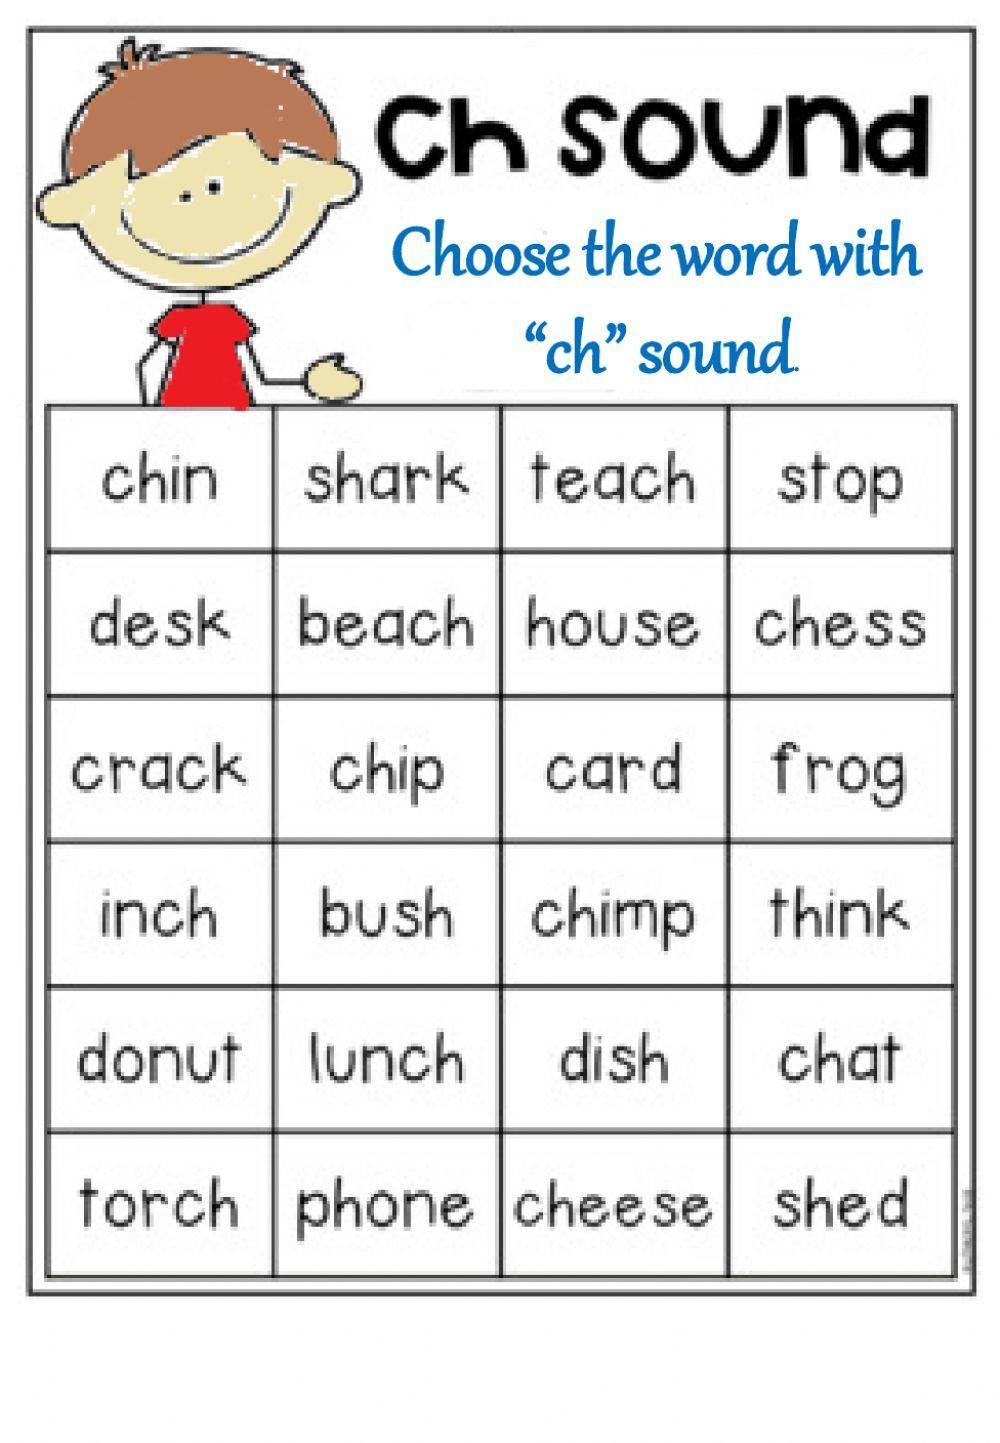 Phonics and spelling